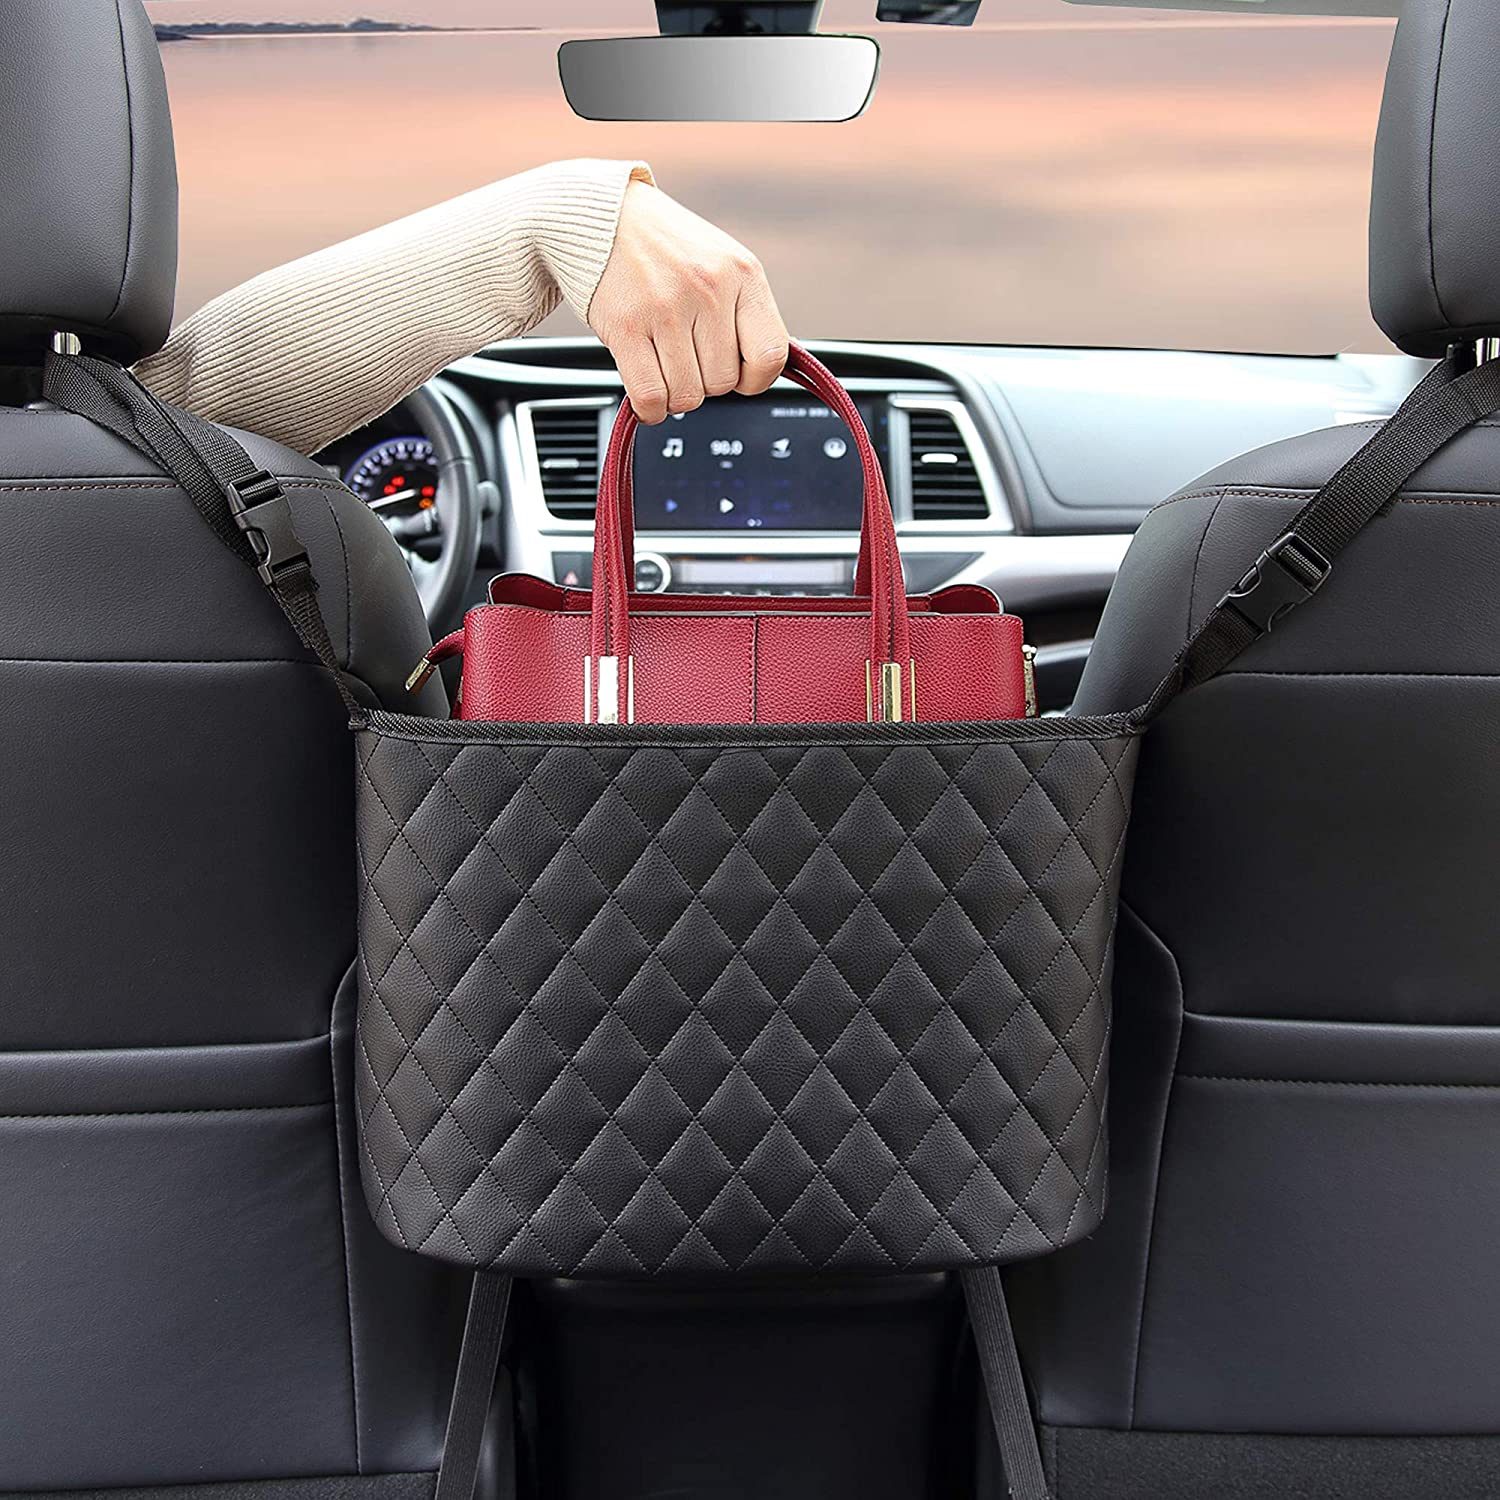 The Best Car Accessories That'll Have You Driving In Style